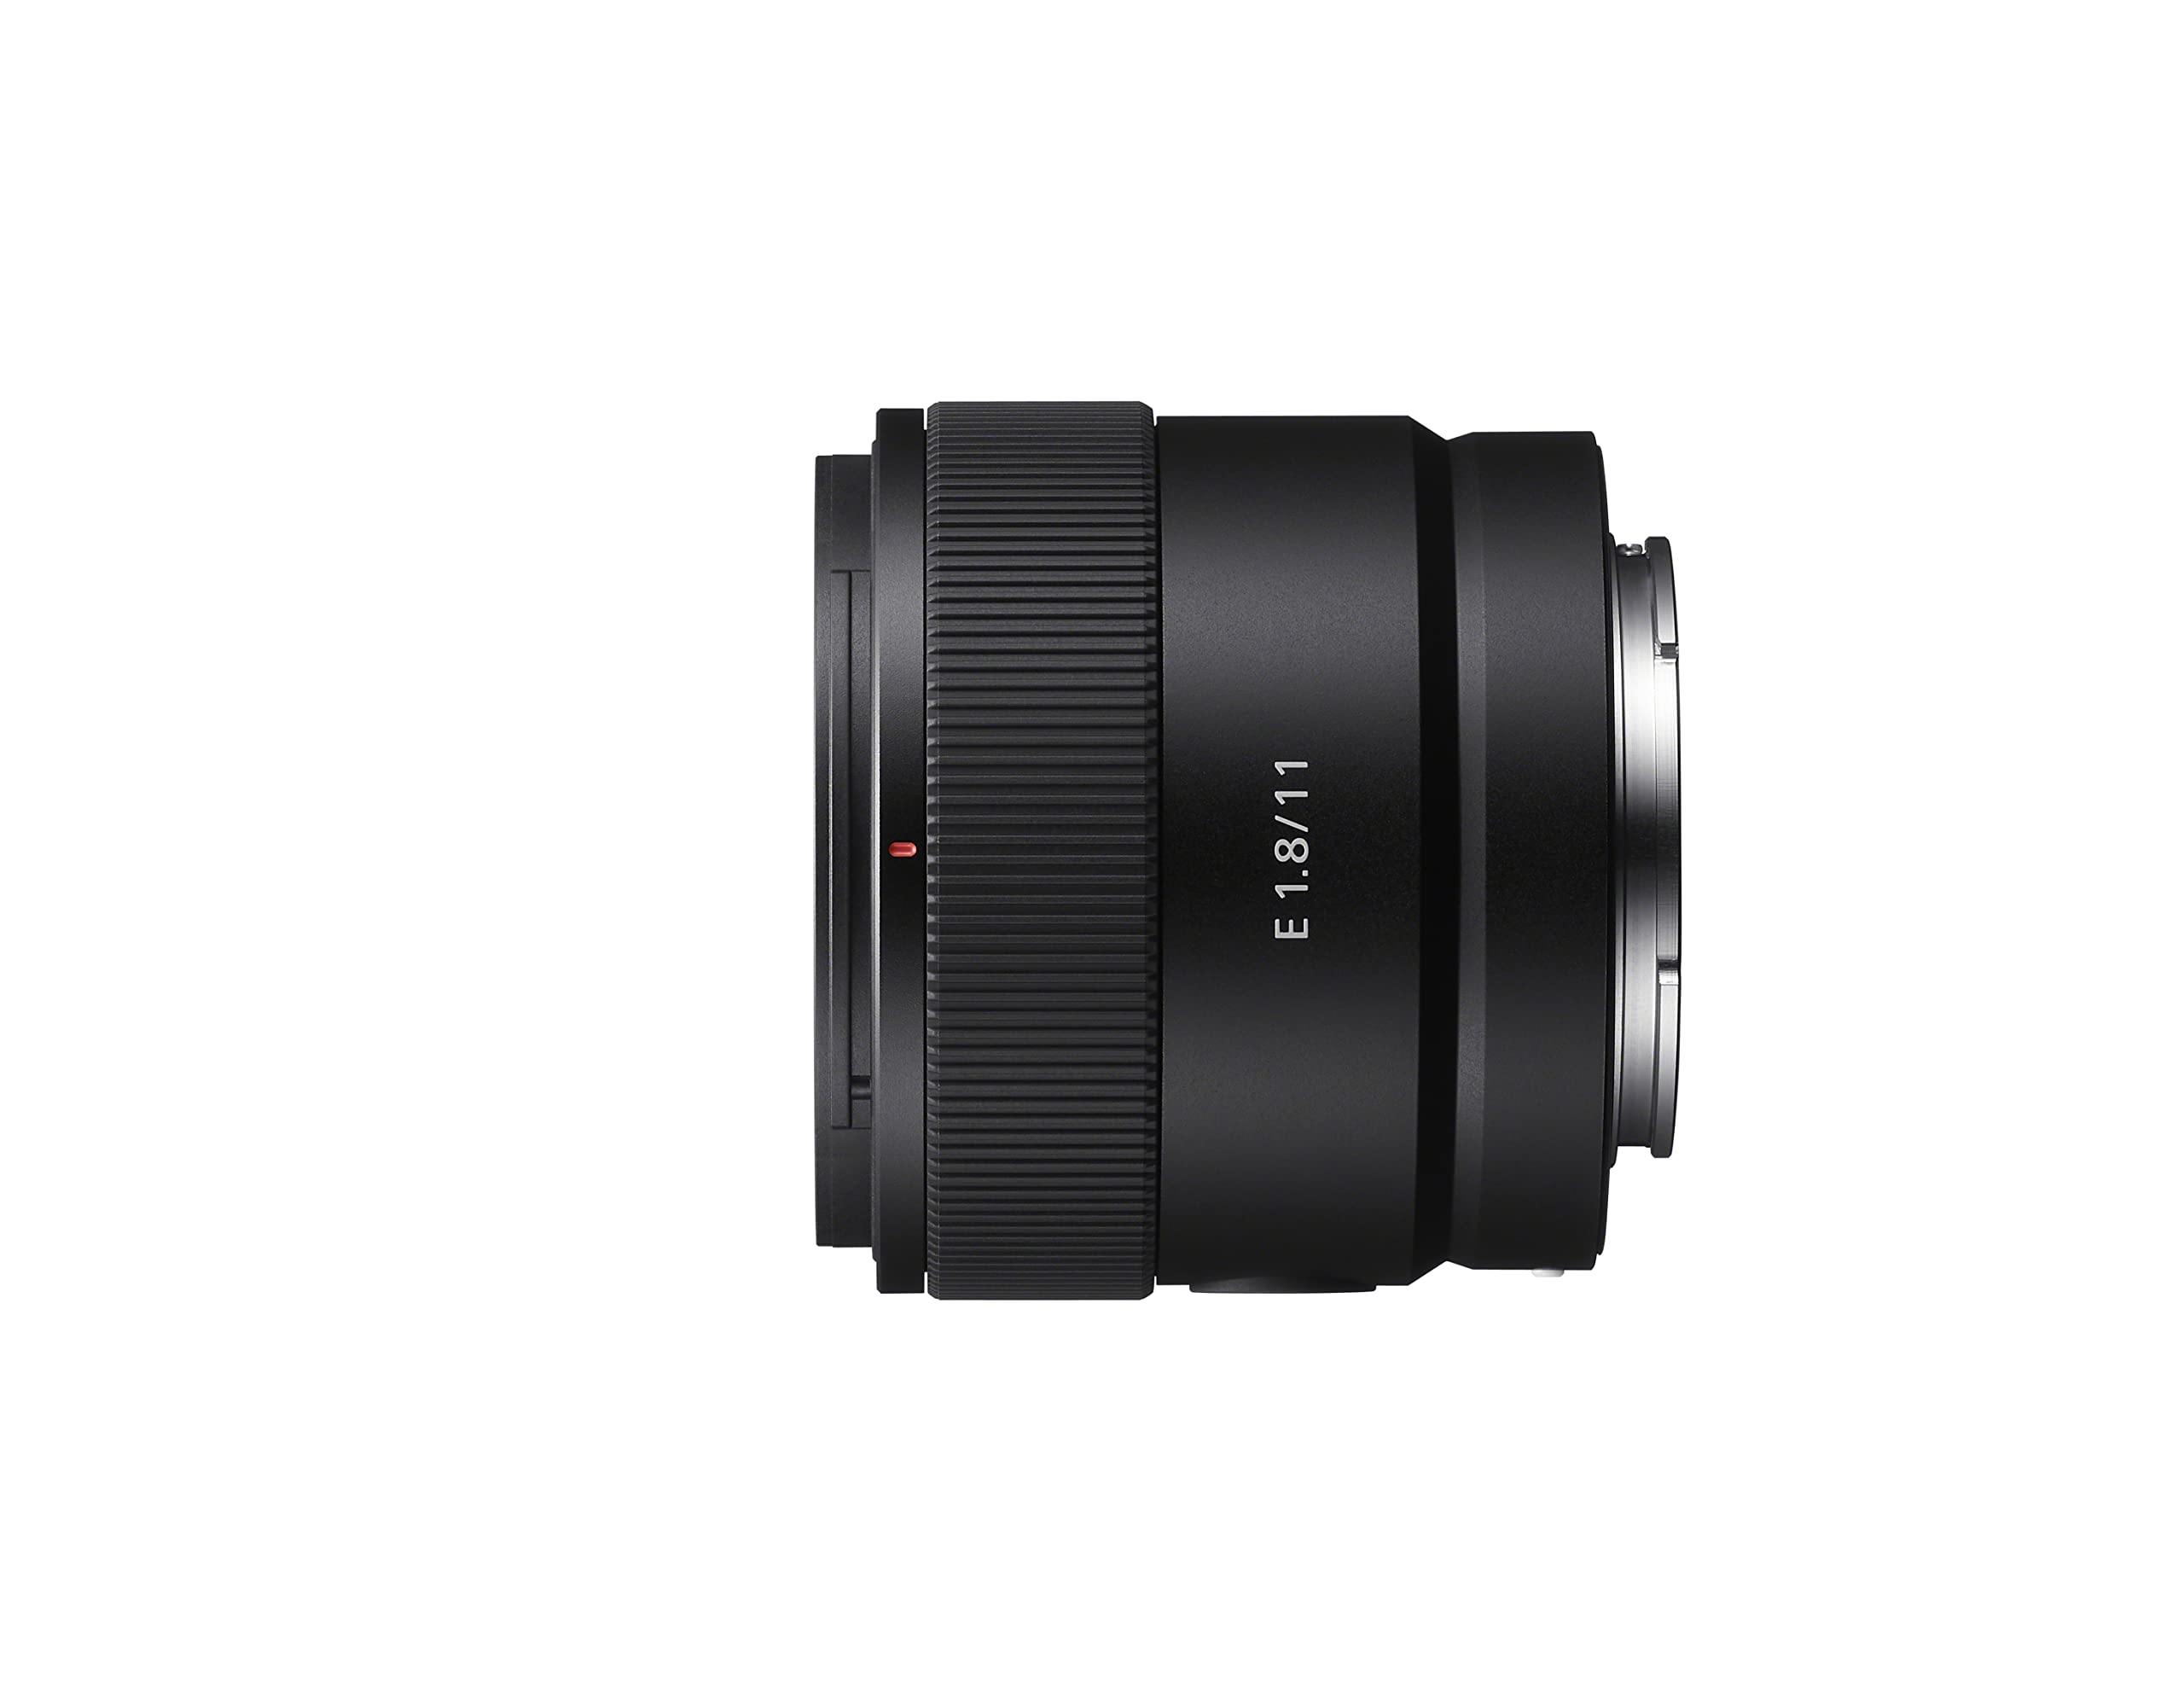 Sony E 11mm F1.8 APS-C Ultra-Wide-Angle Prime for APS-C Cameras